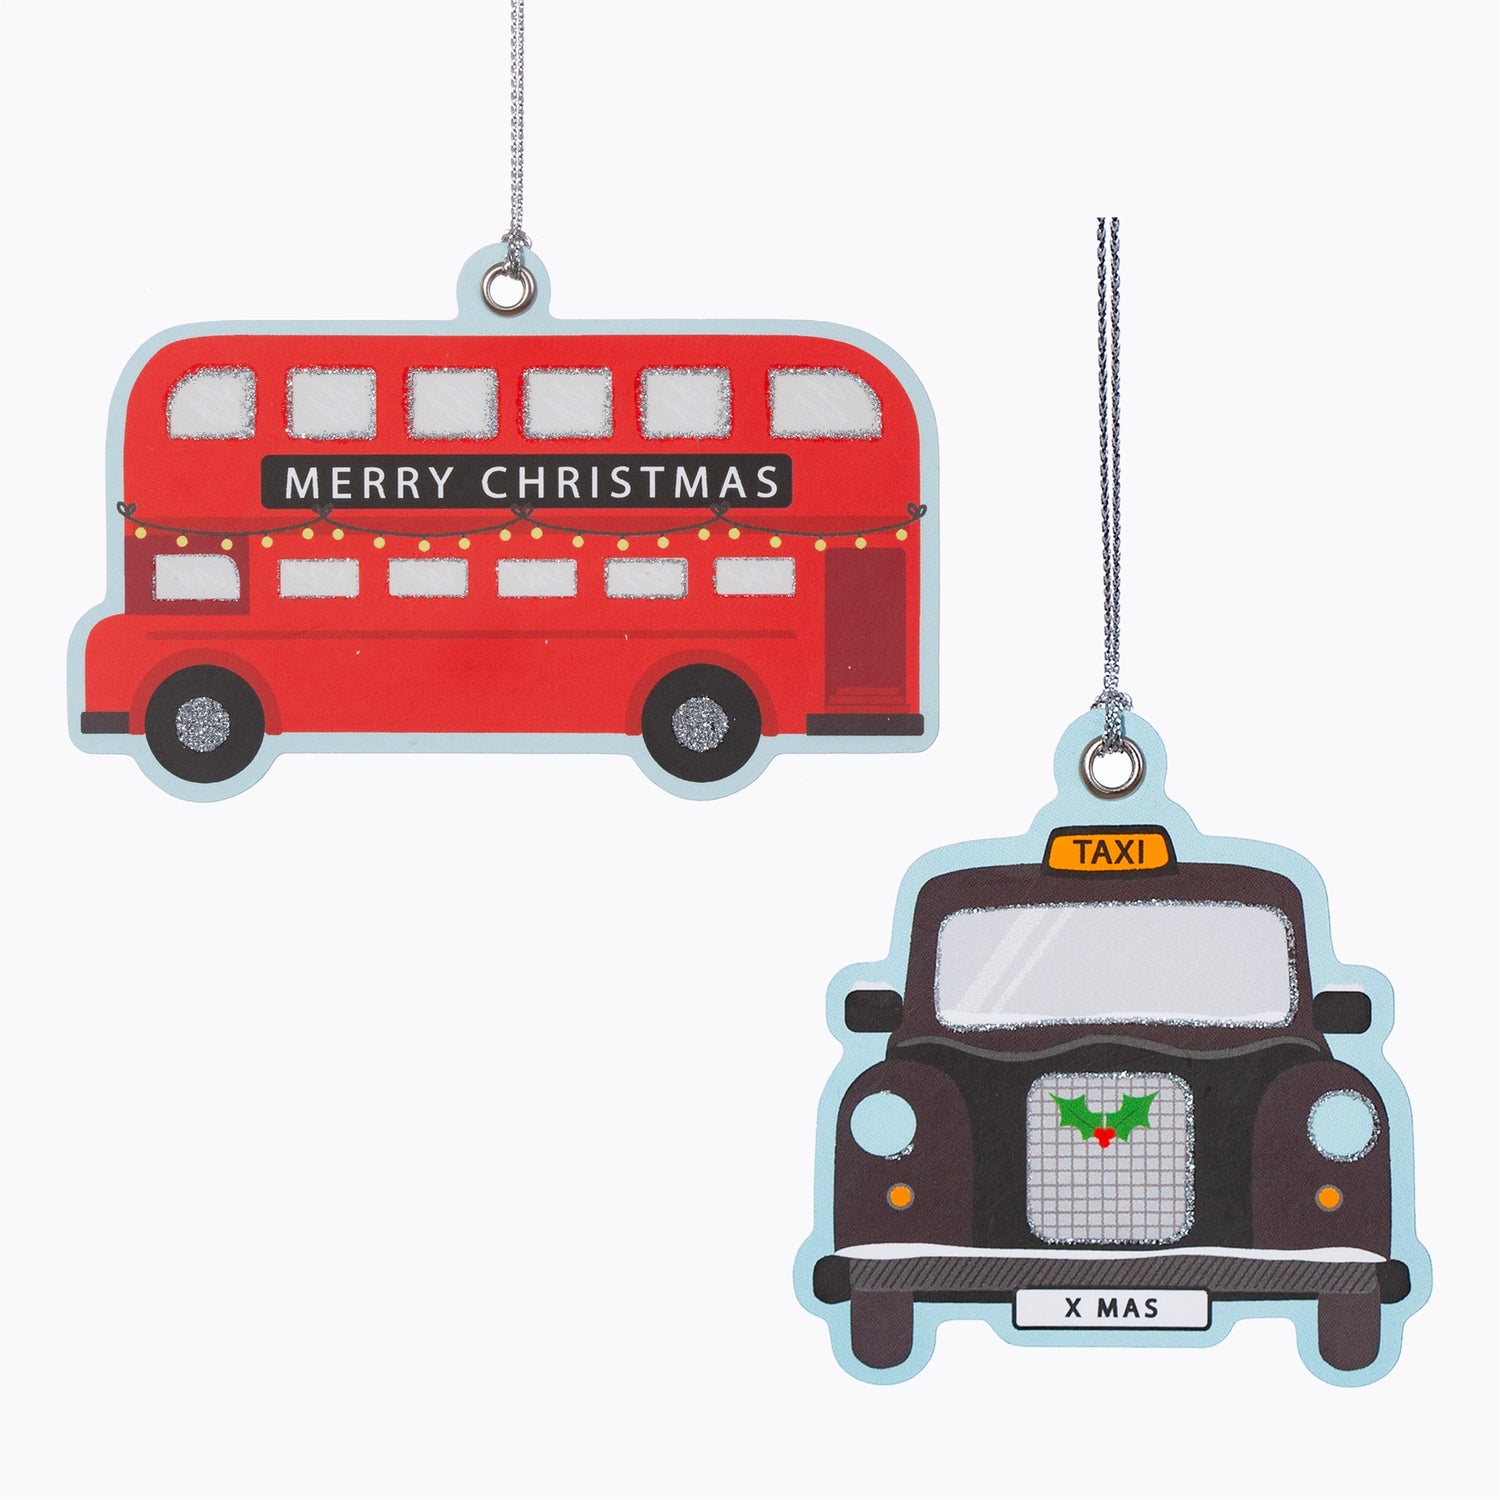 Bring a touch of the city to your gifts this year with these very cool London transport gift tags featuring a red London Bus and Black Cab.